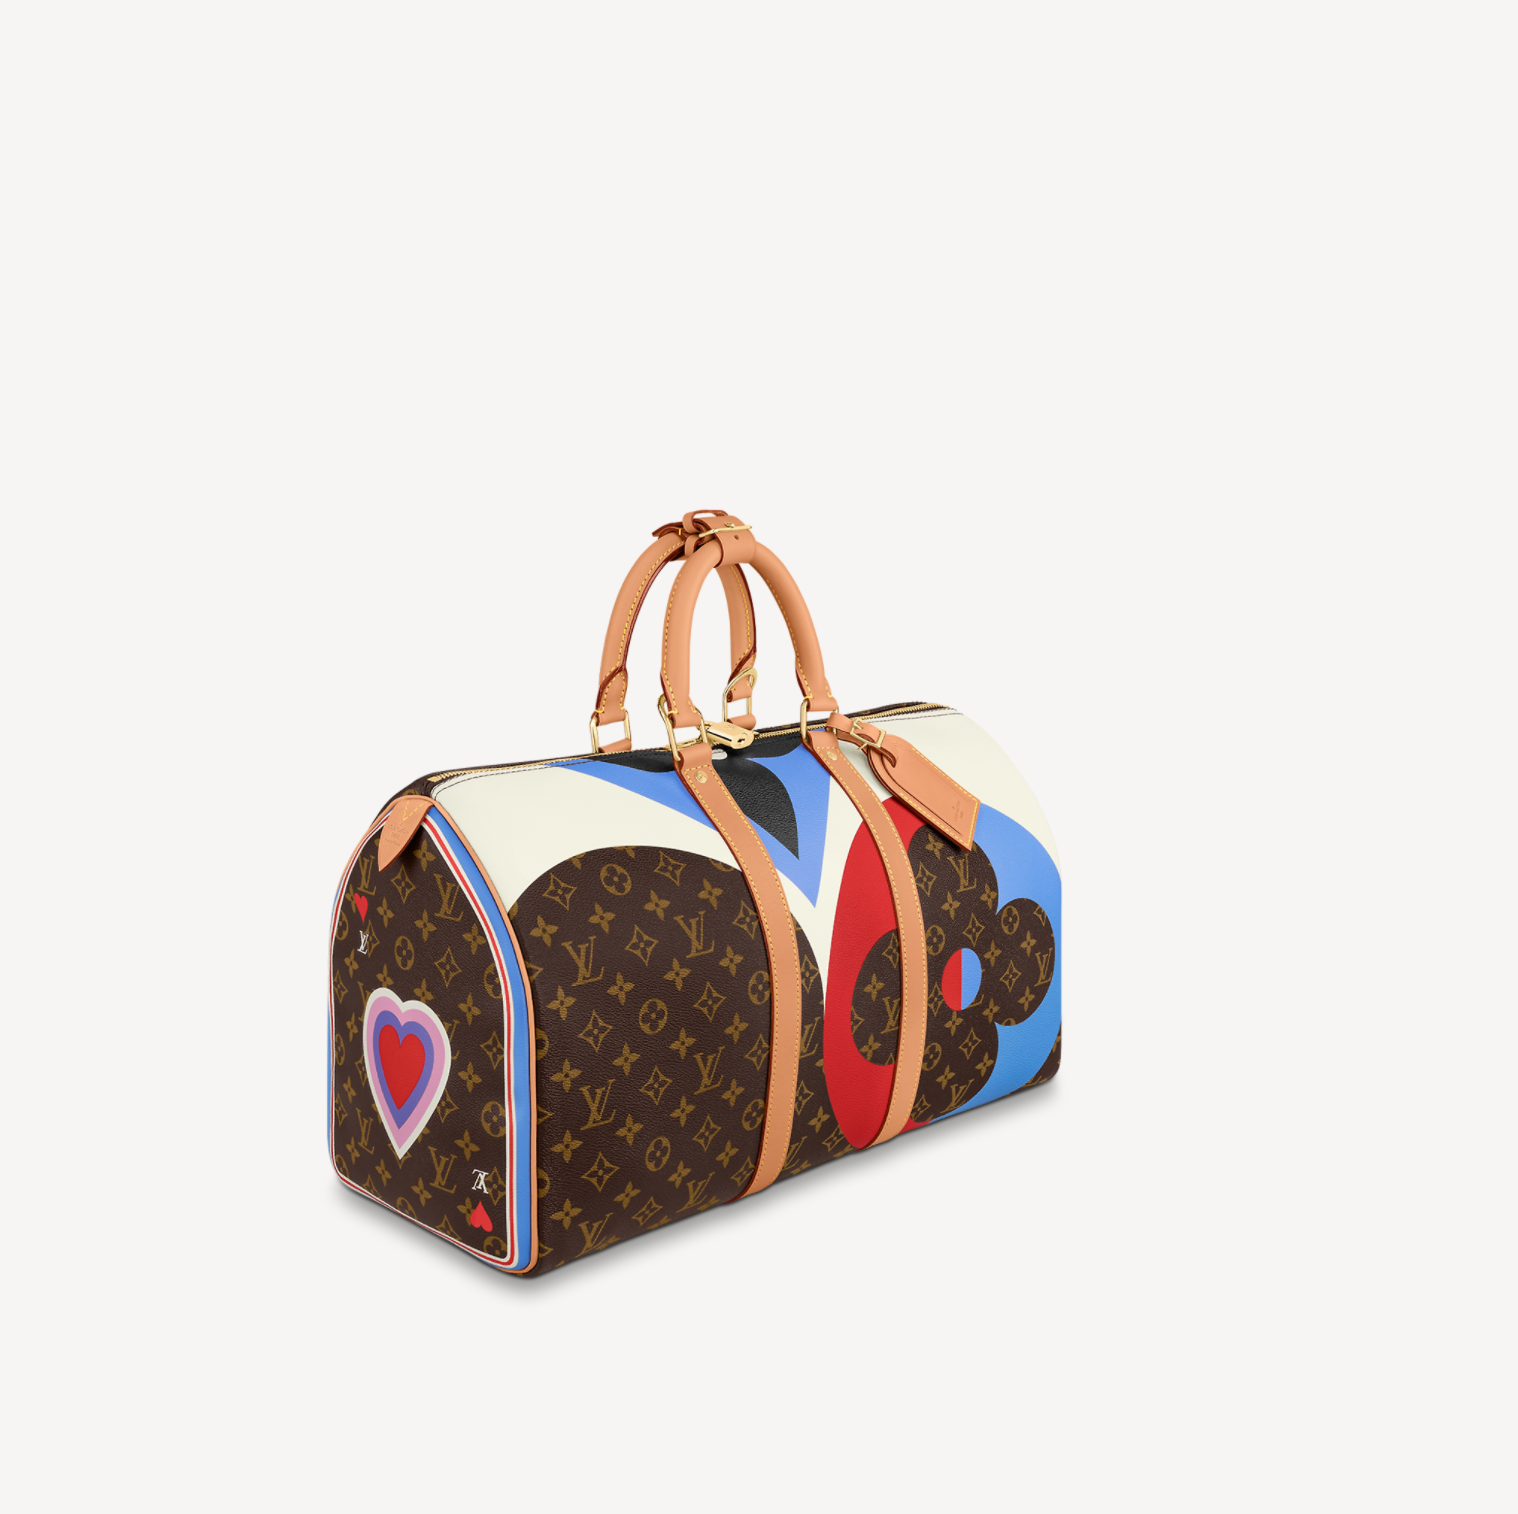 New 2021 Limited Edition Louis vuitton Keepall Bandoulière 45 Bag